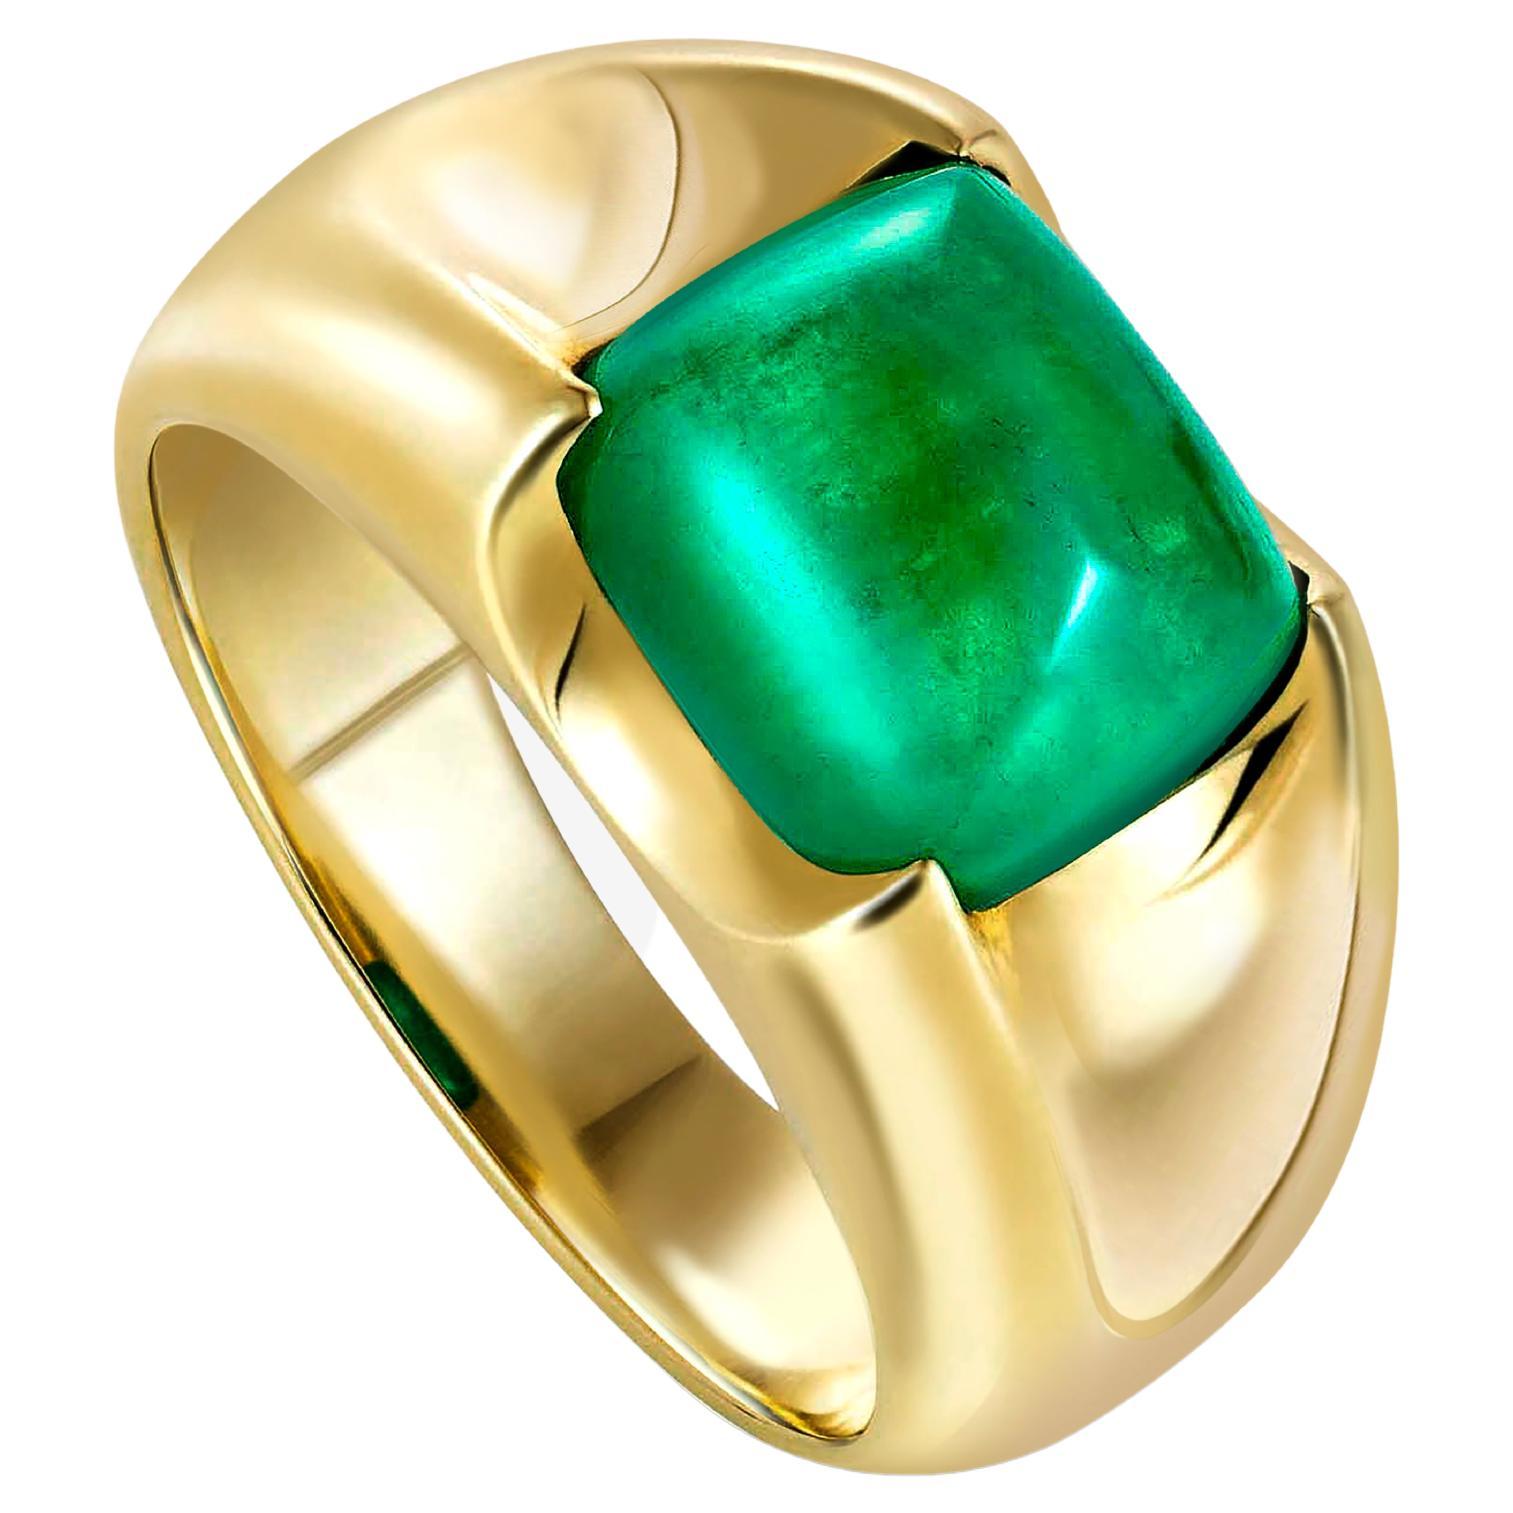 SPEAR TIP RING  Yellow gold with a sugarloaf emerald cabochon by Liv Luttrell